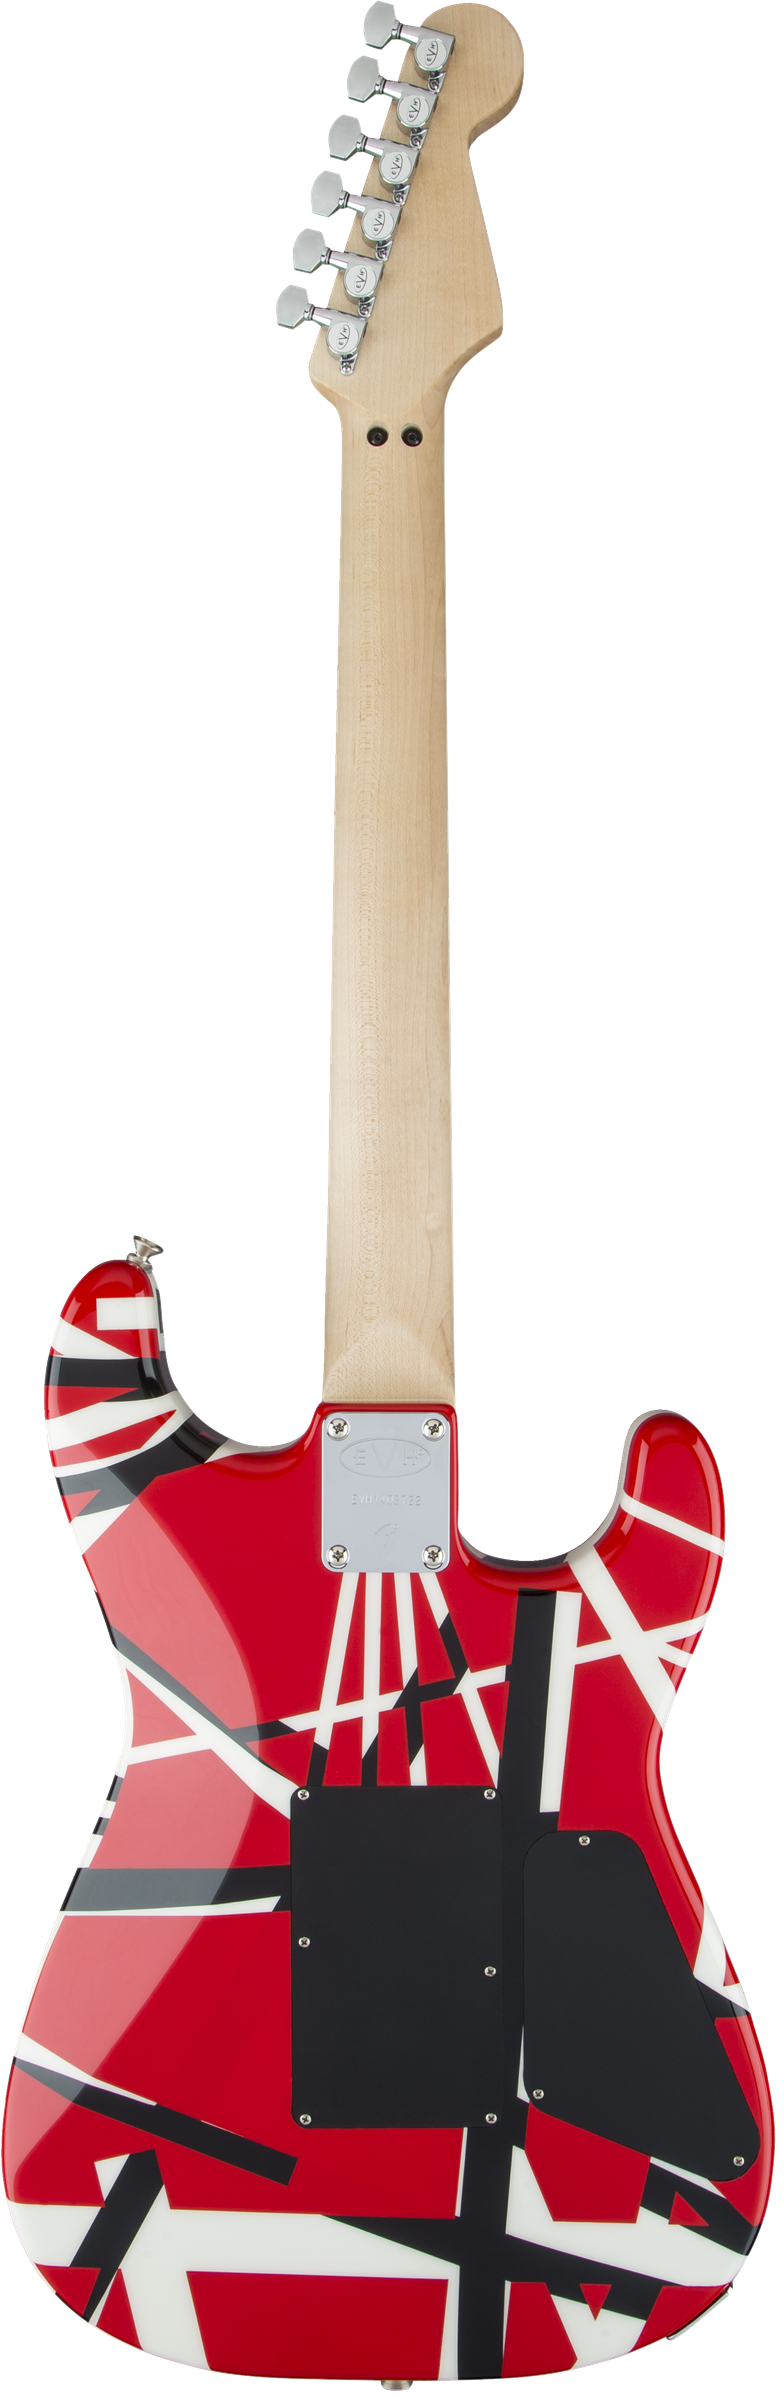 Back of EVH Striped Series Left Hand MP Red, Black and White Stripes.